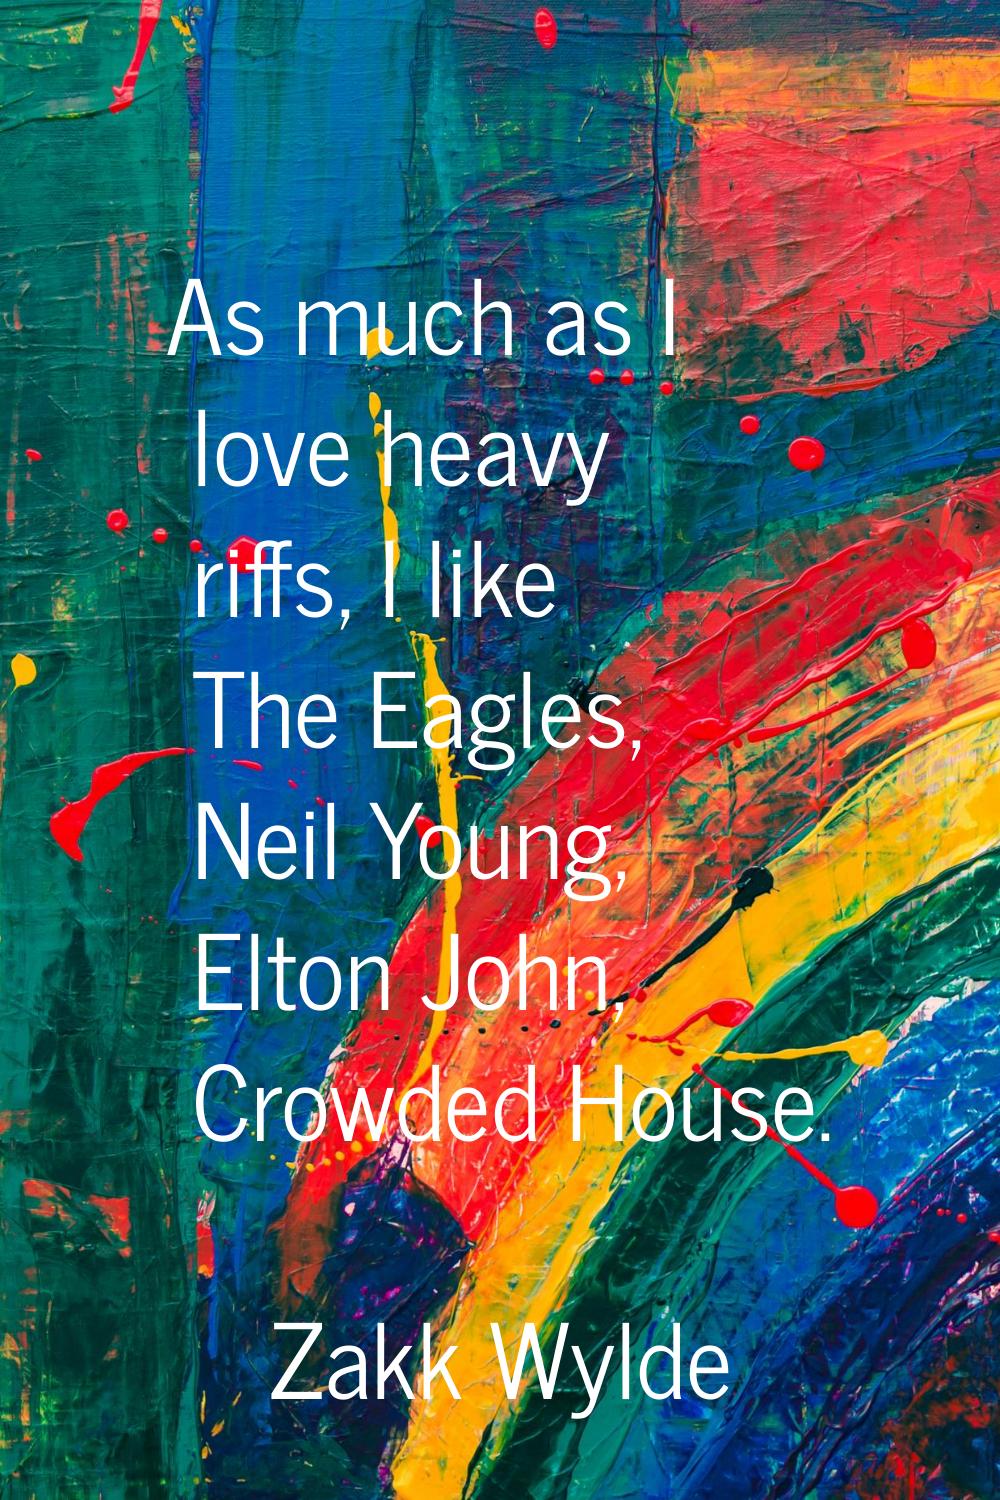 As much as I love heavy riffs, I like The Eagles, Neil Young, Elton John, Crowded House.